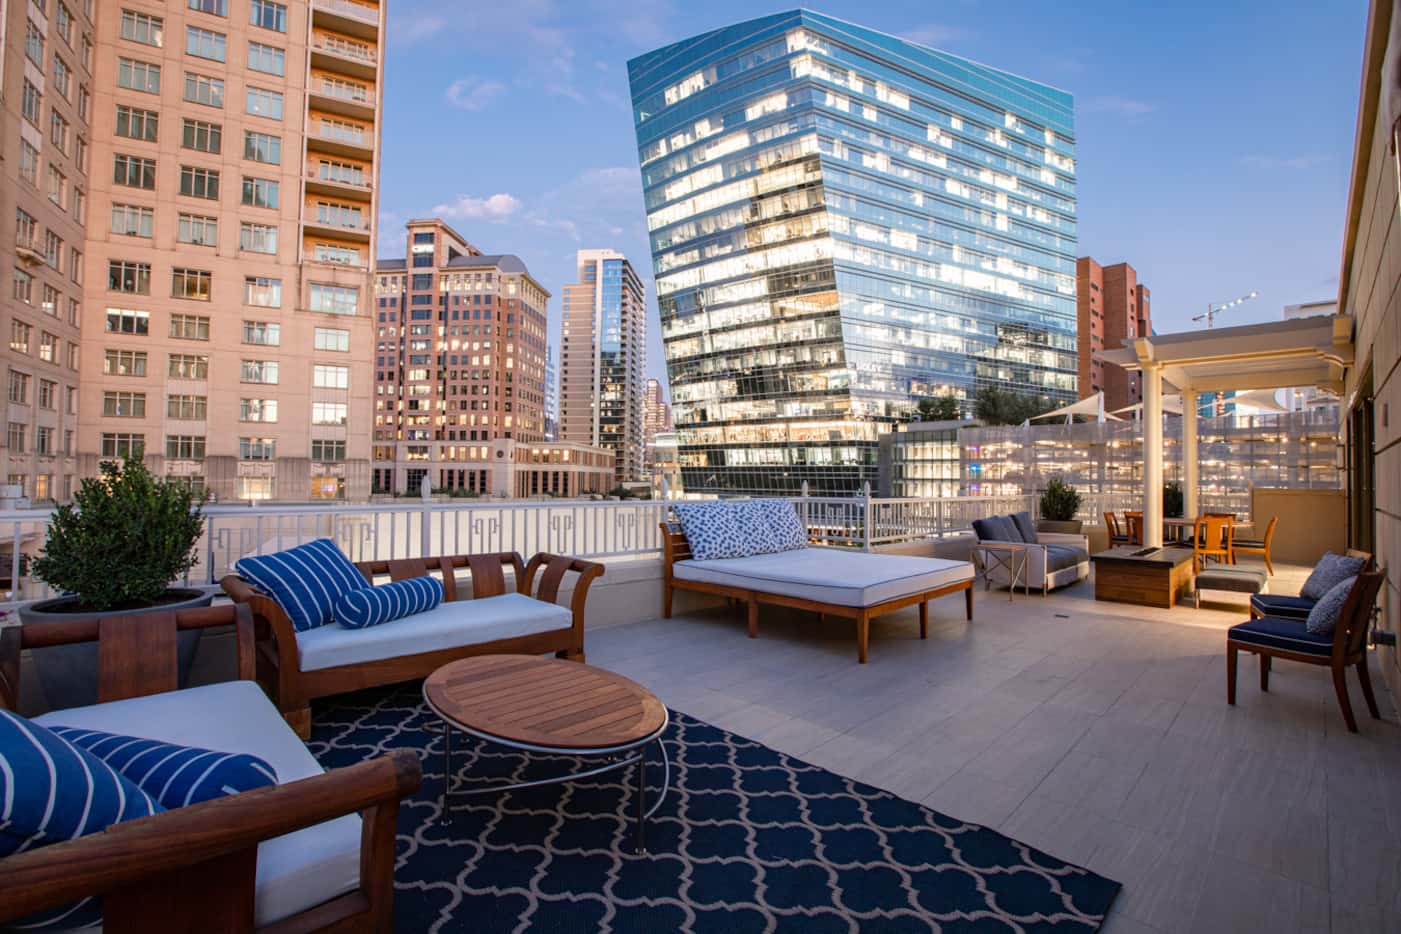 The rooftop terrace at Regency Row.